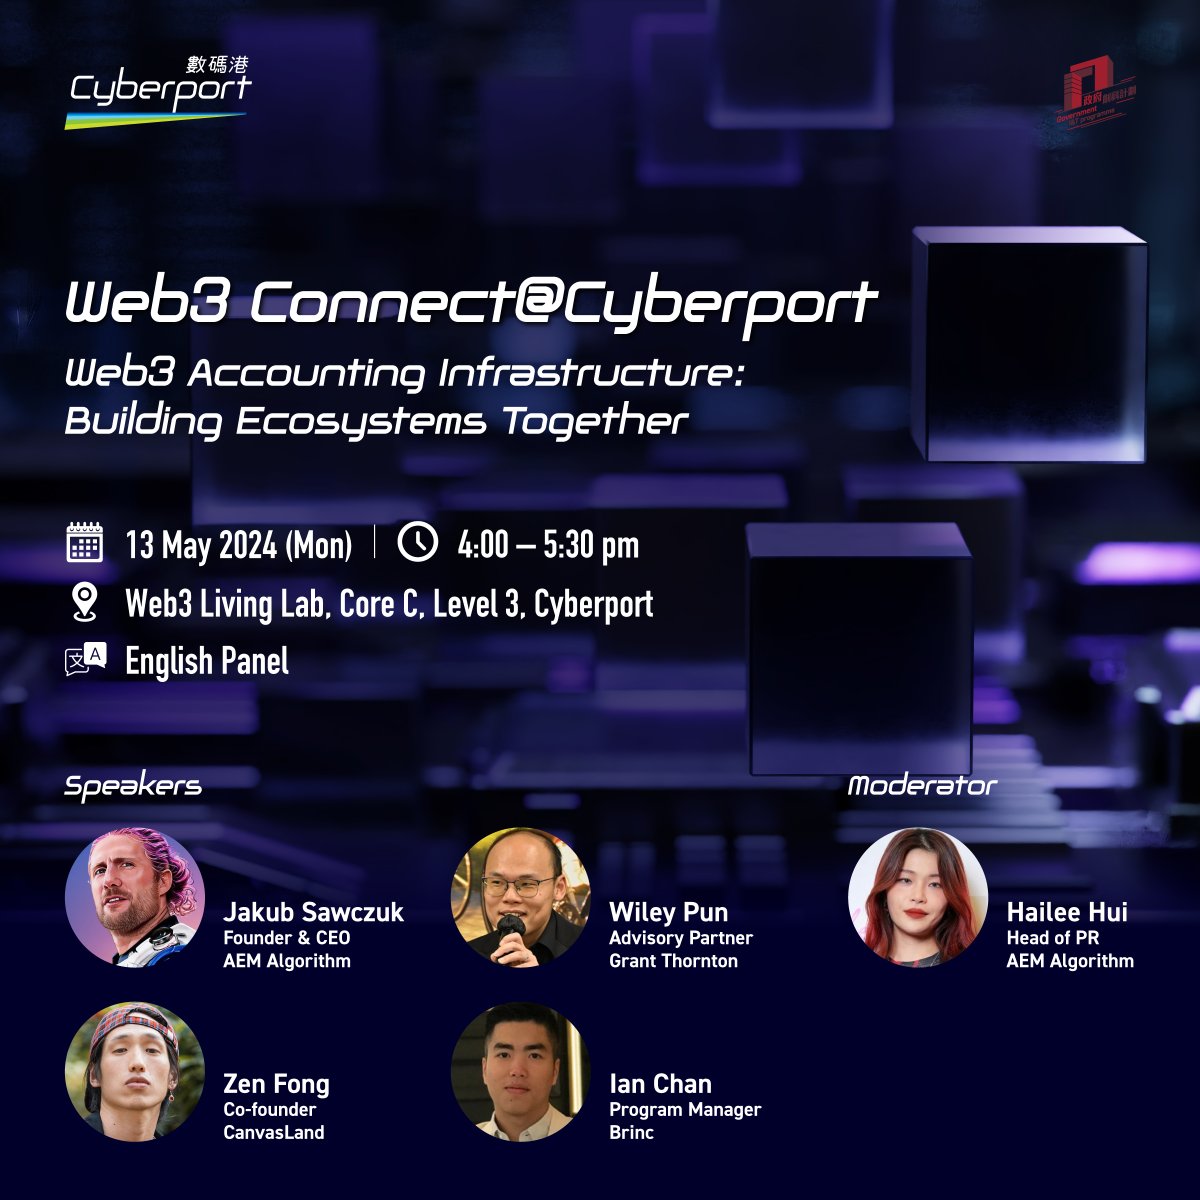 Join Web3 Connect@Cyberport on May 13, to explore Web3 accounting innovation under Hong Kong taxation laws with industry pioneers from @AEM_Algorithm , @GrantThorntonUS , @CanvasLandWeb3 , and @brincvc . Register now: bit.ly/3ULOwCT